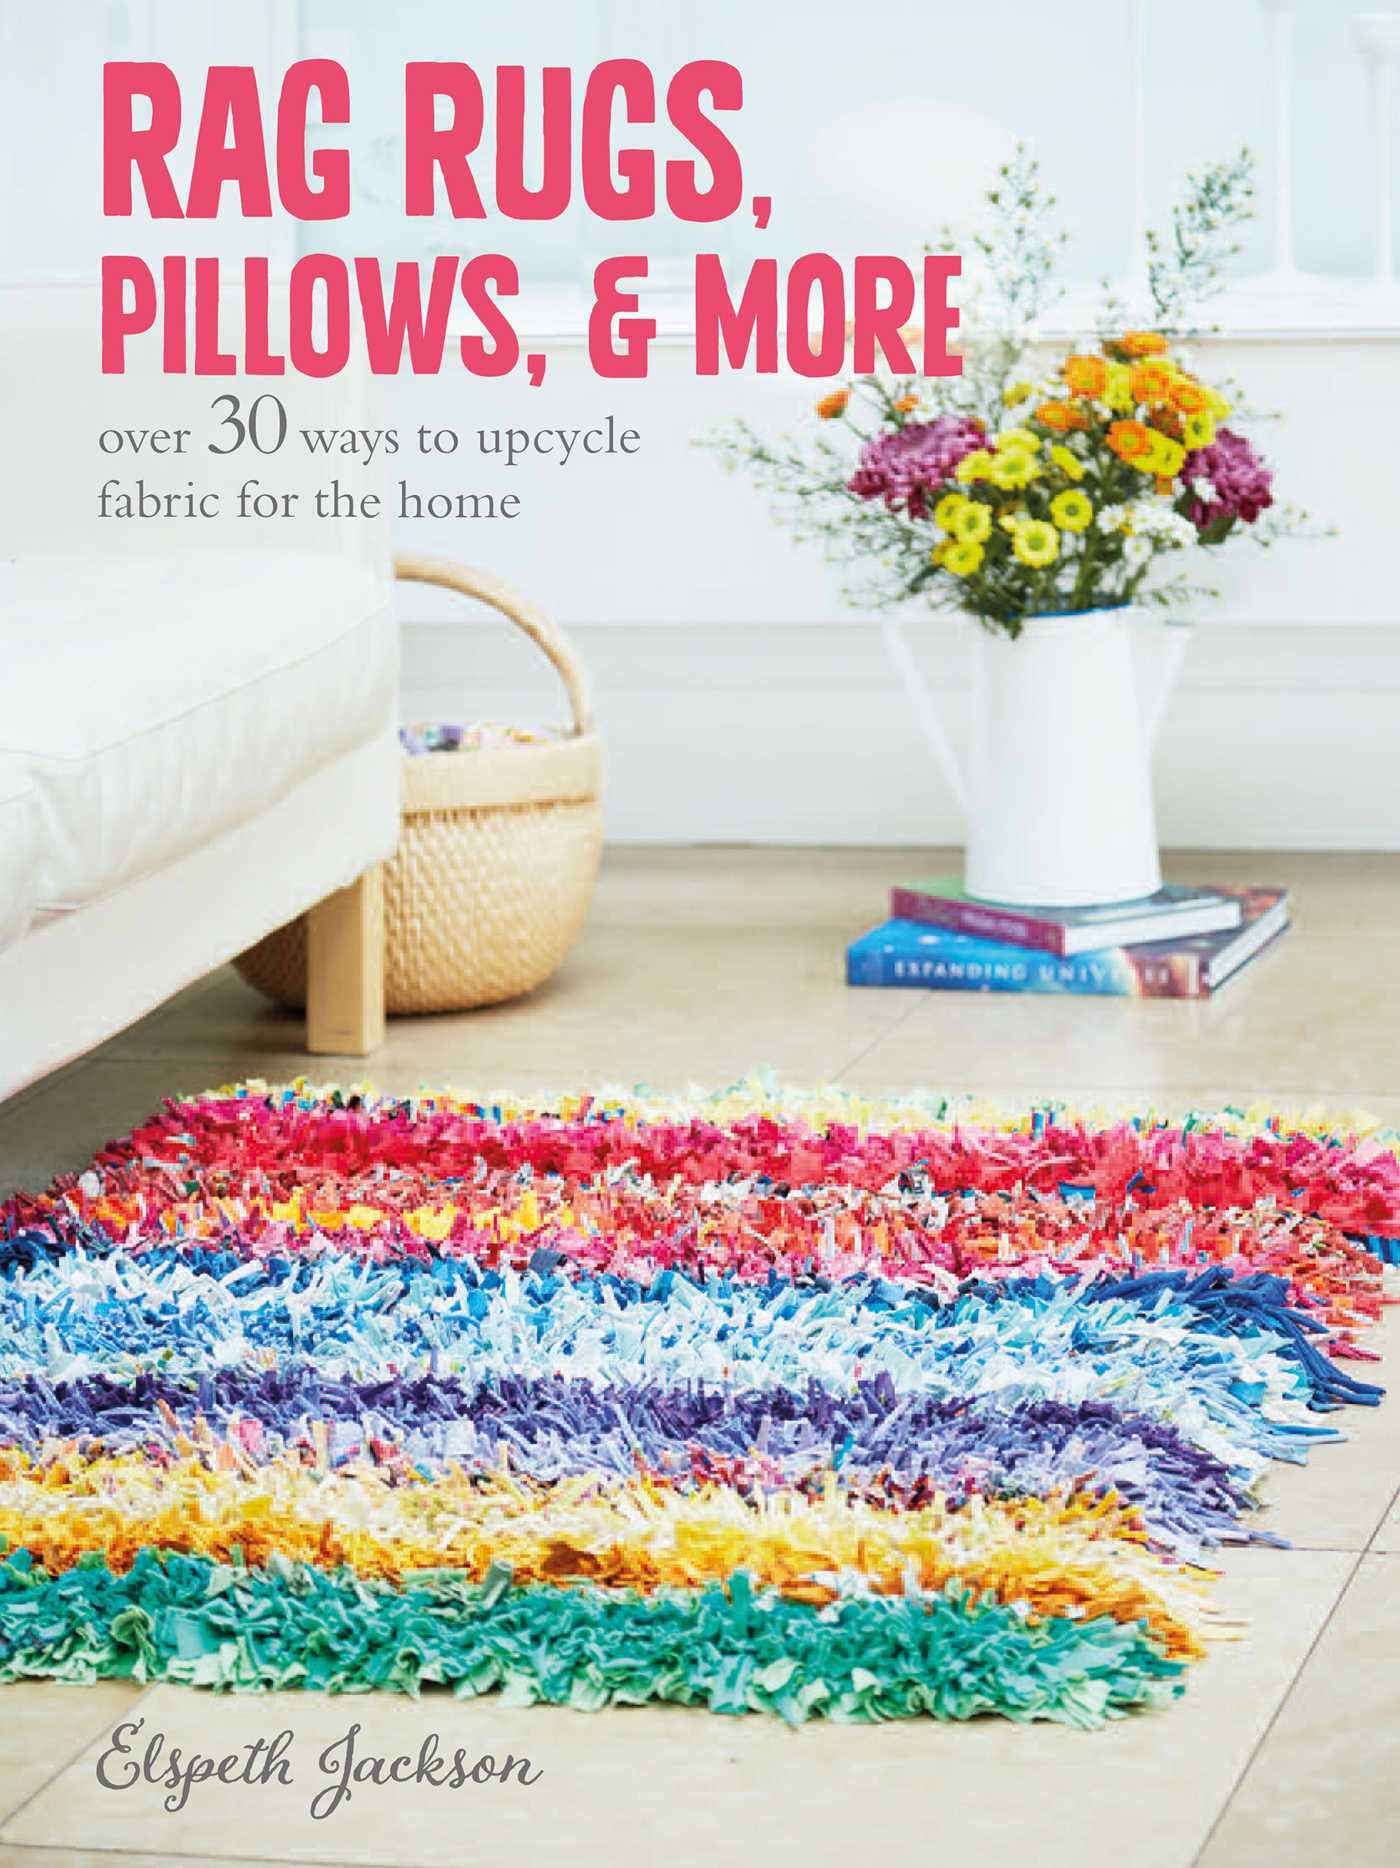 Rag Rugs, Pillows, and More: Over 30 ways to upcycle fabric for the home